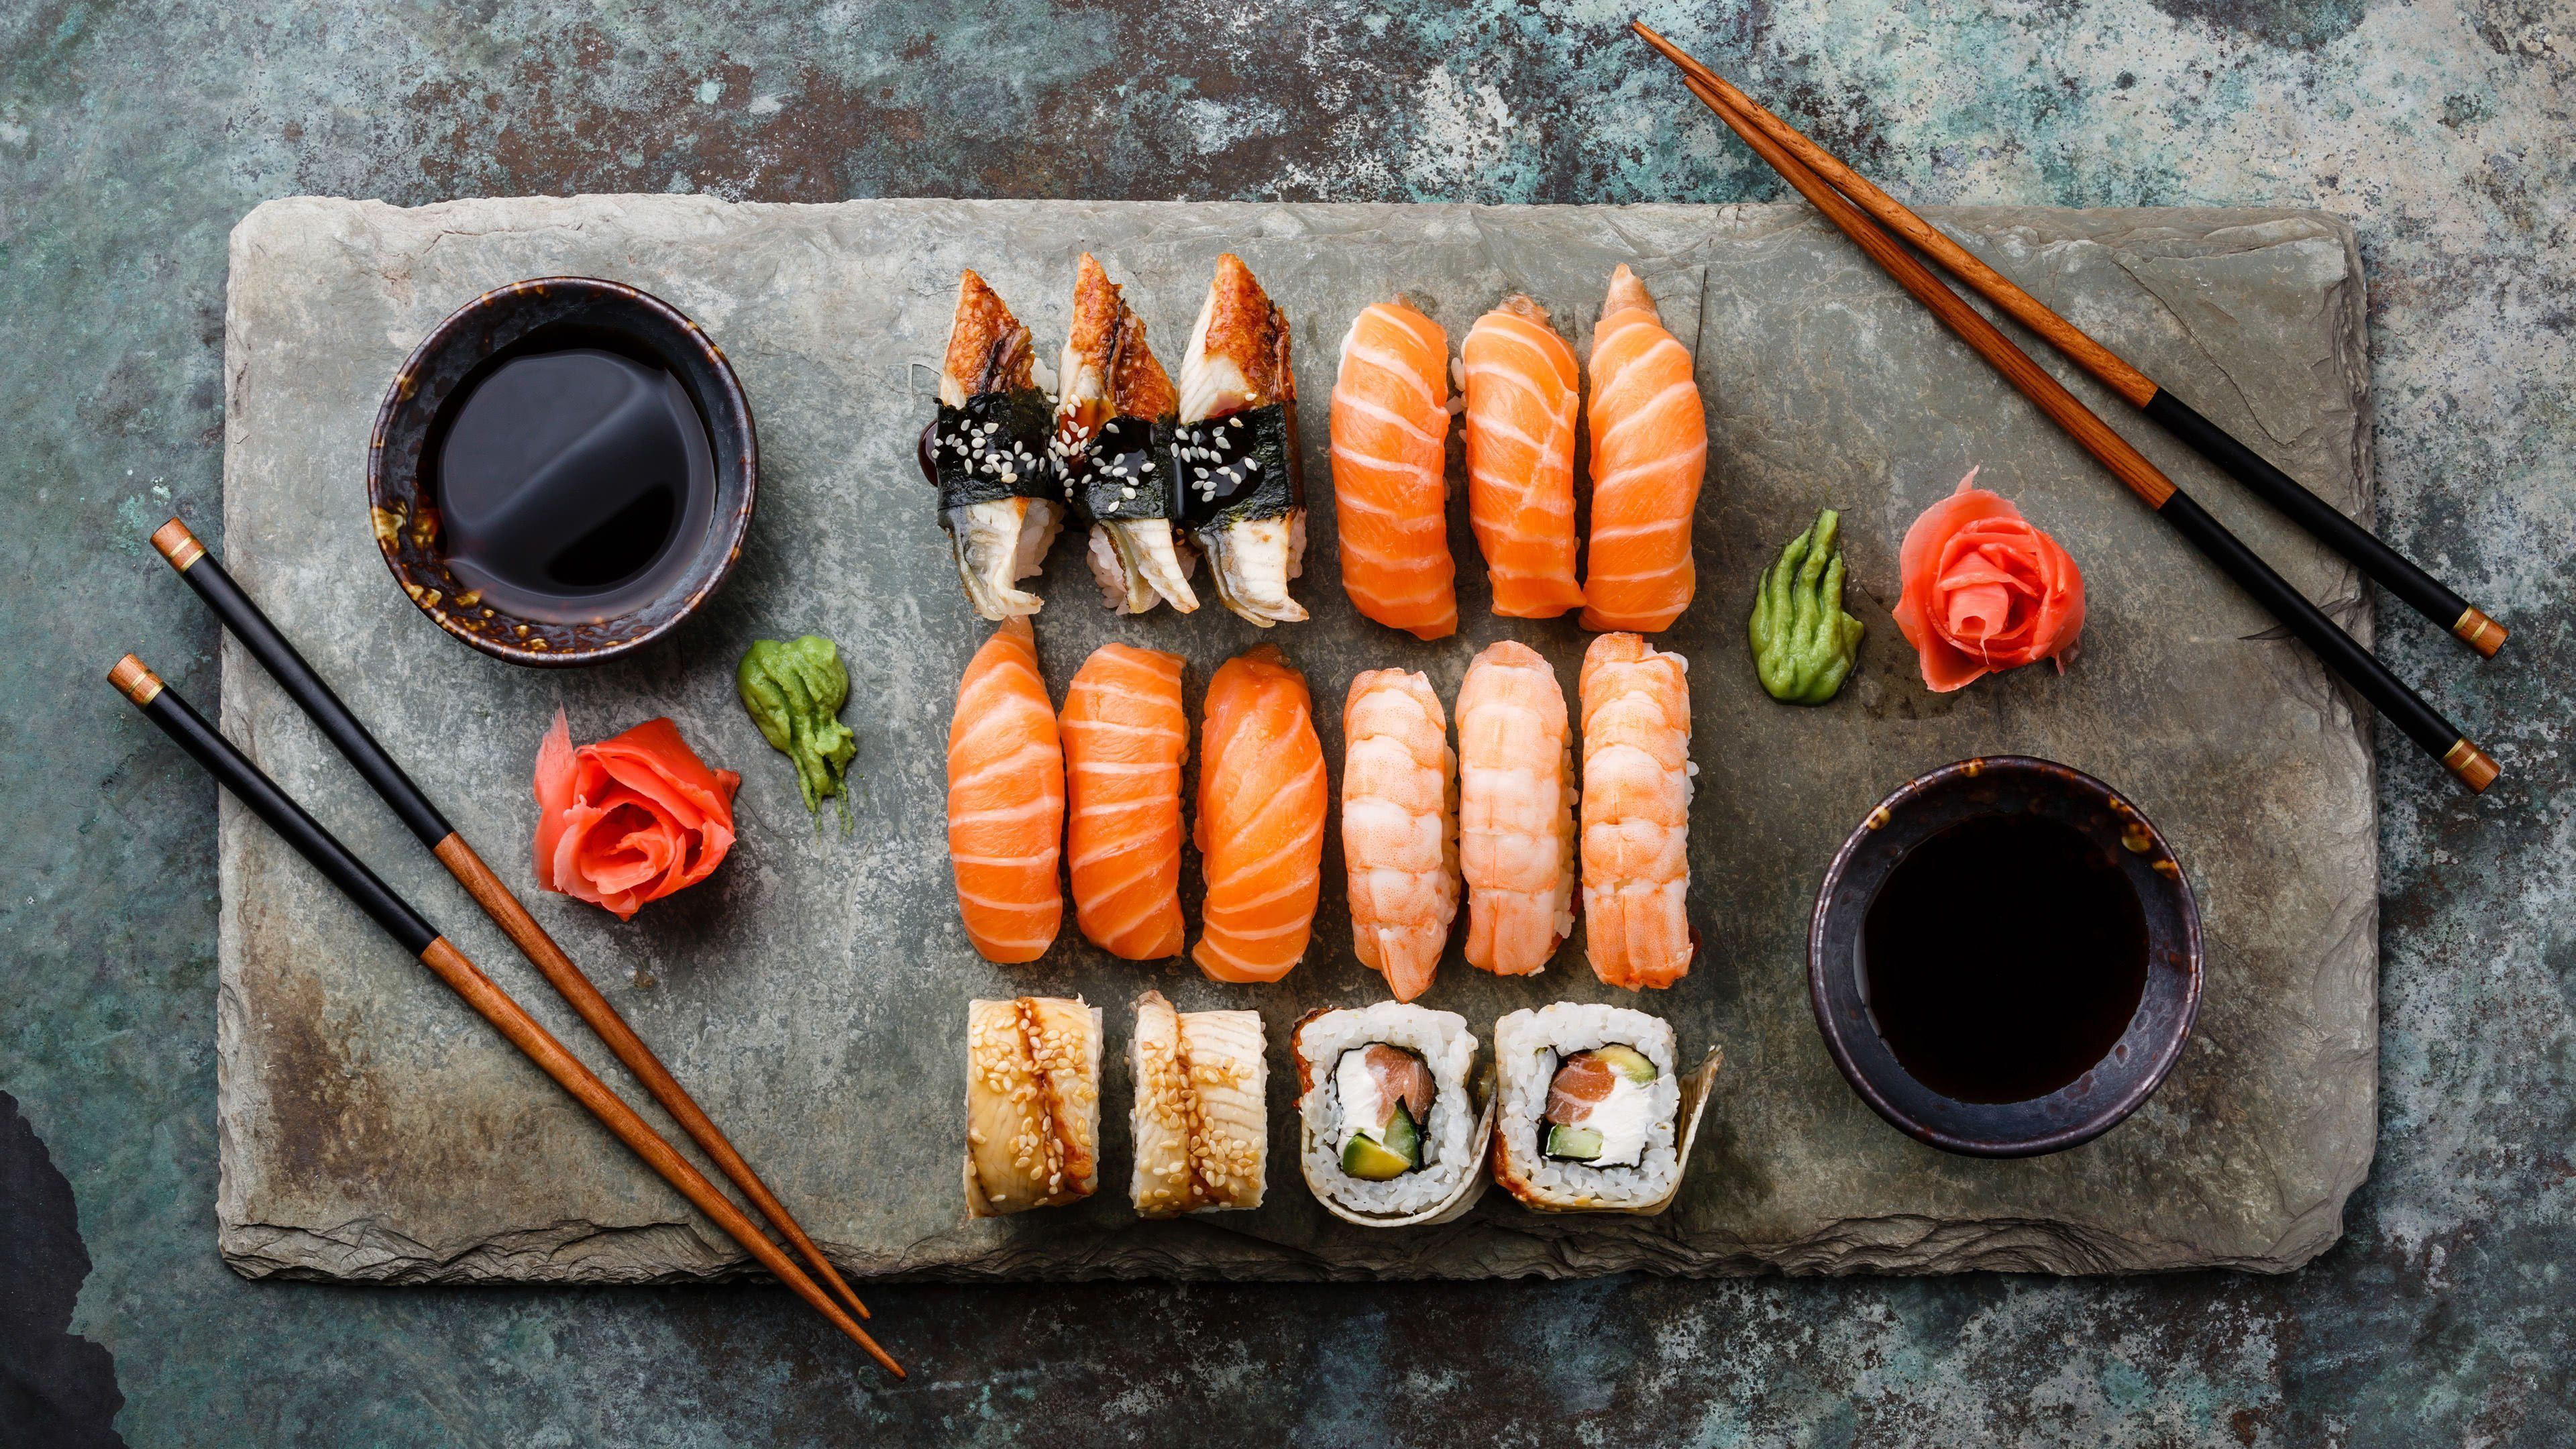 Sushi 4K wallpaper for your desktop or mobile screen free and easy to download